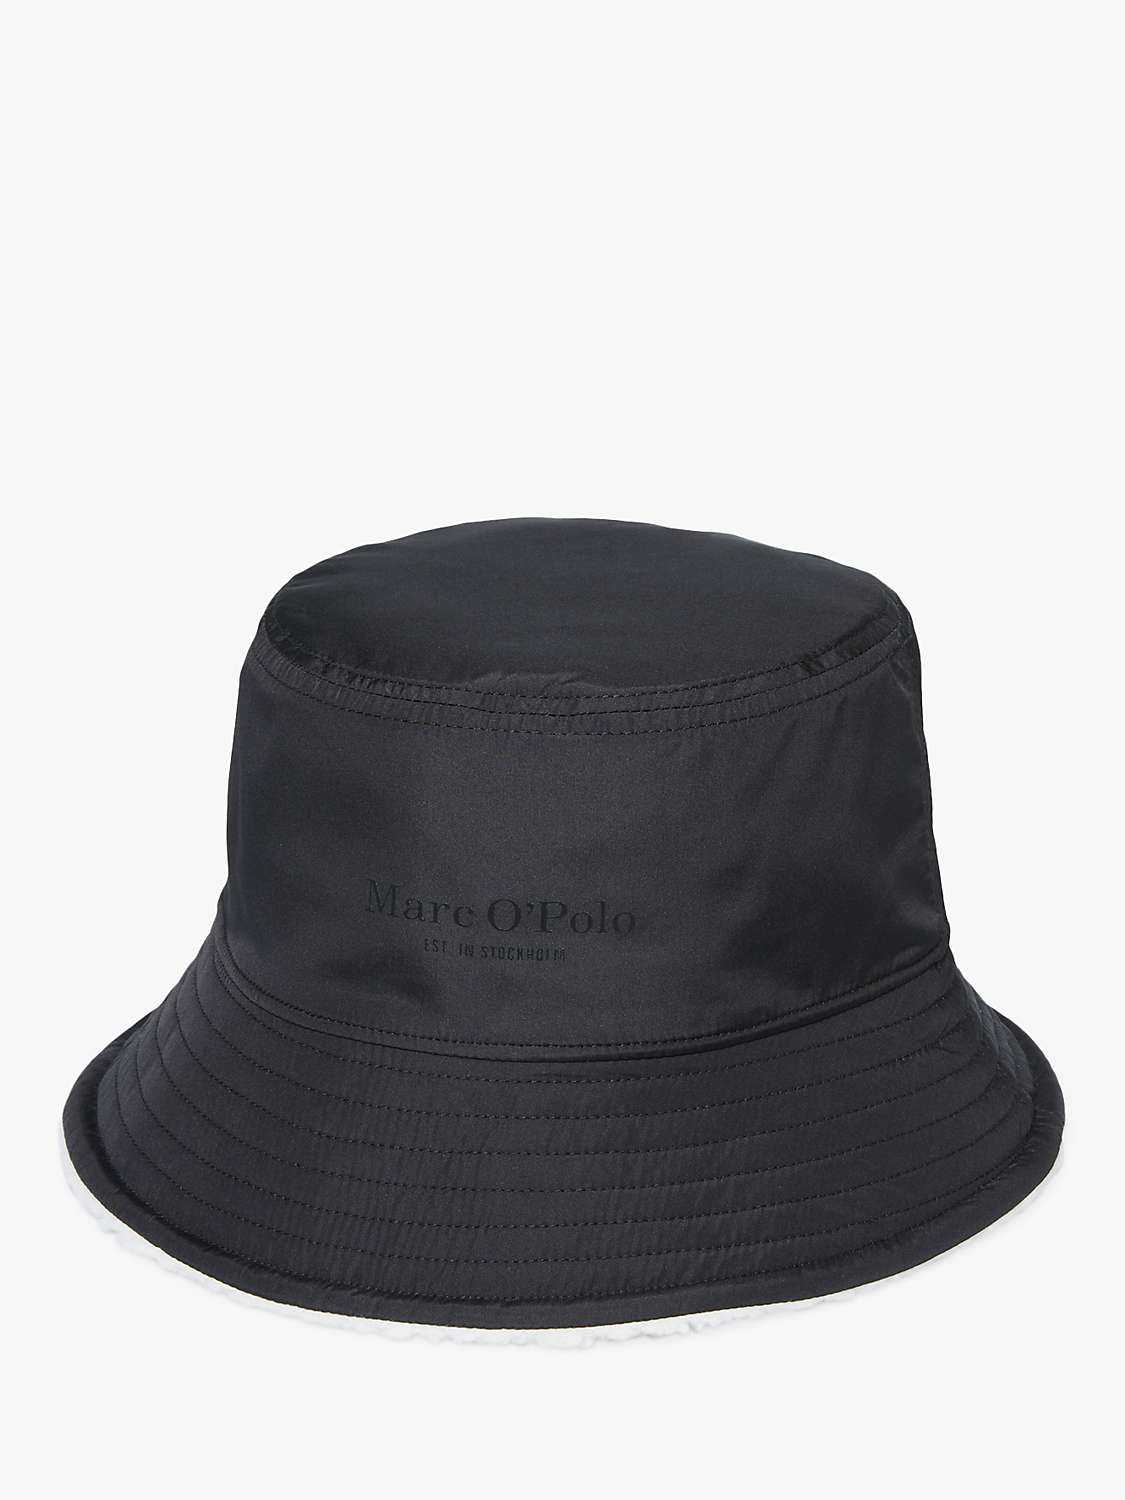 Buy Marc O'Polo Reversible Bucket Hat With Teddy Lining, Black Online at johnlewis.com